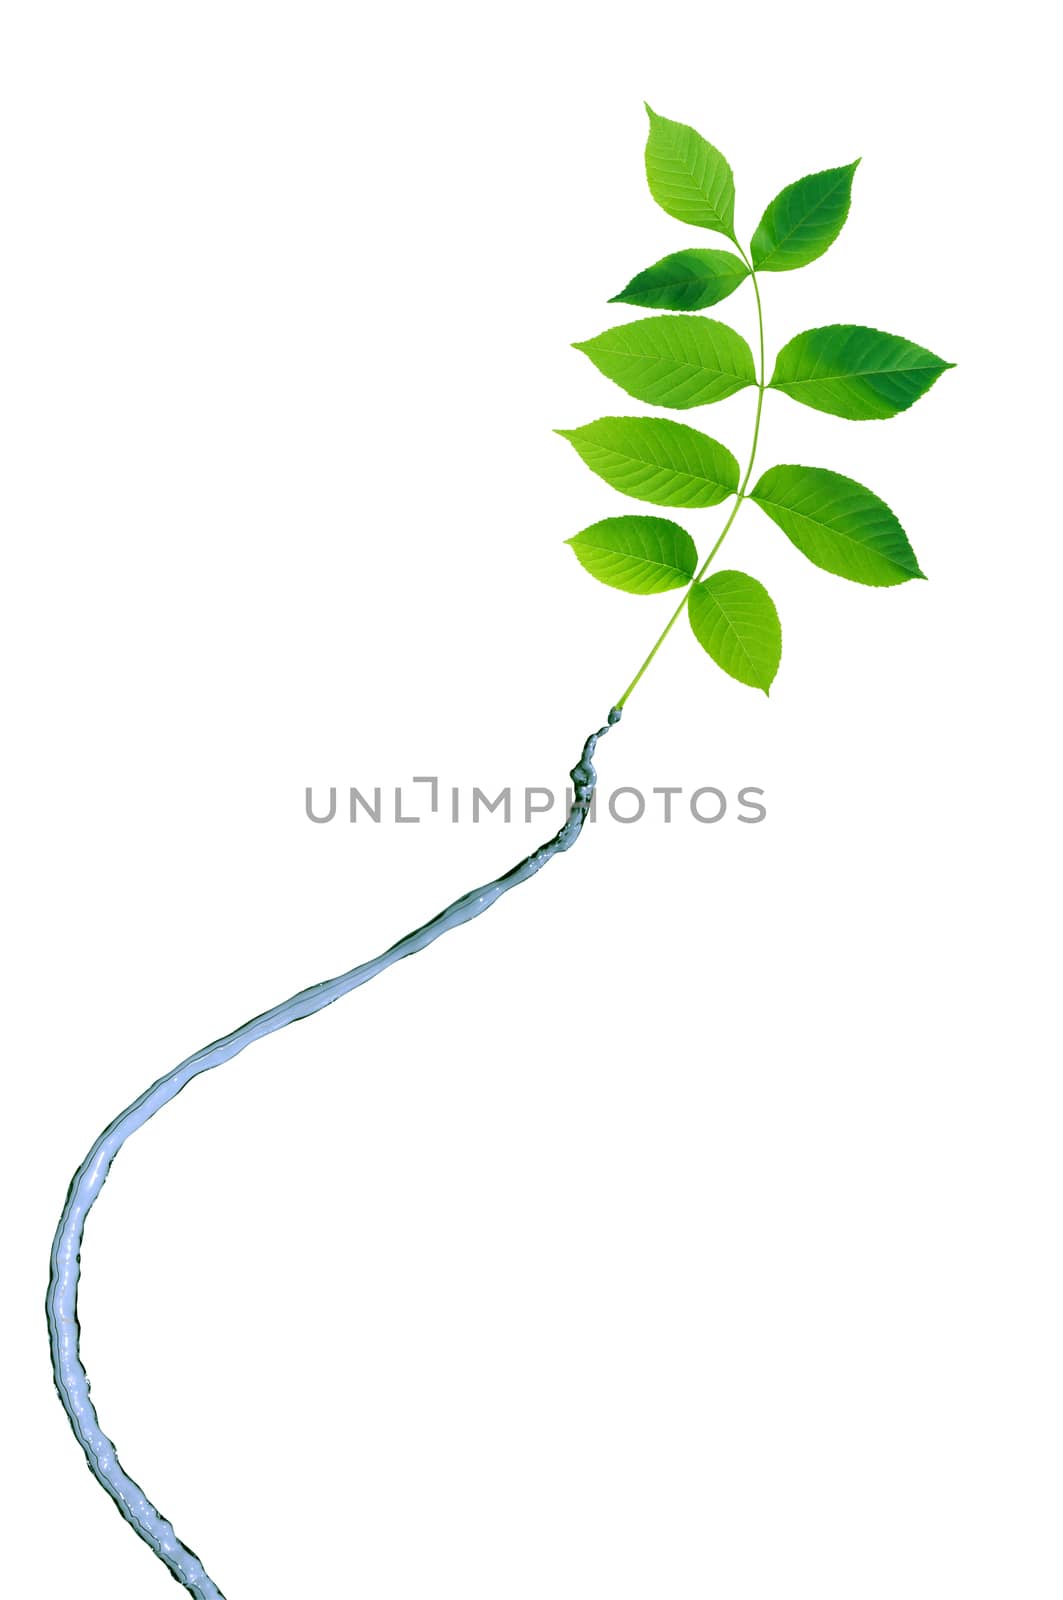 Freshness green leaves with water jet on white background